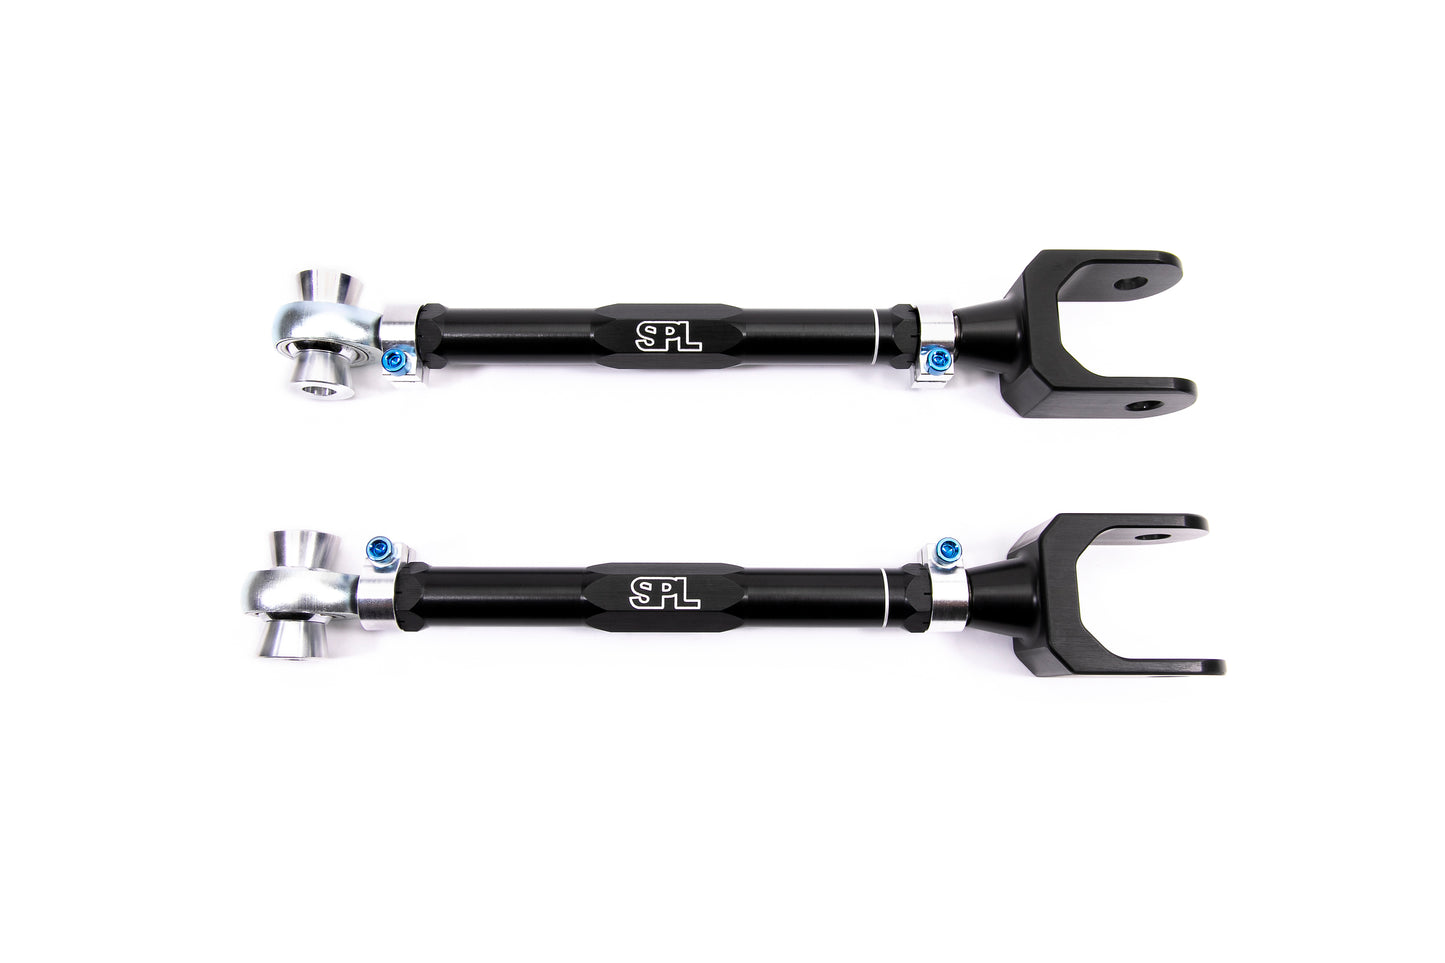 SPL Toyota Supra A90 / BMW Z4 G29 Rear Adjustable Traction Arms